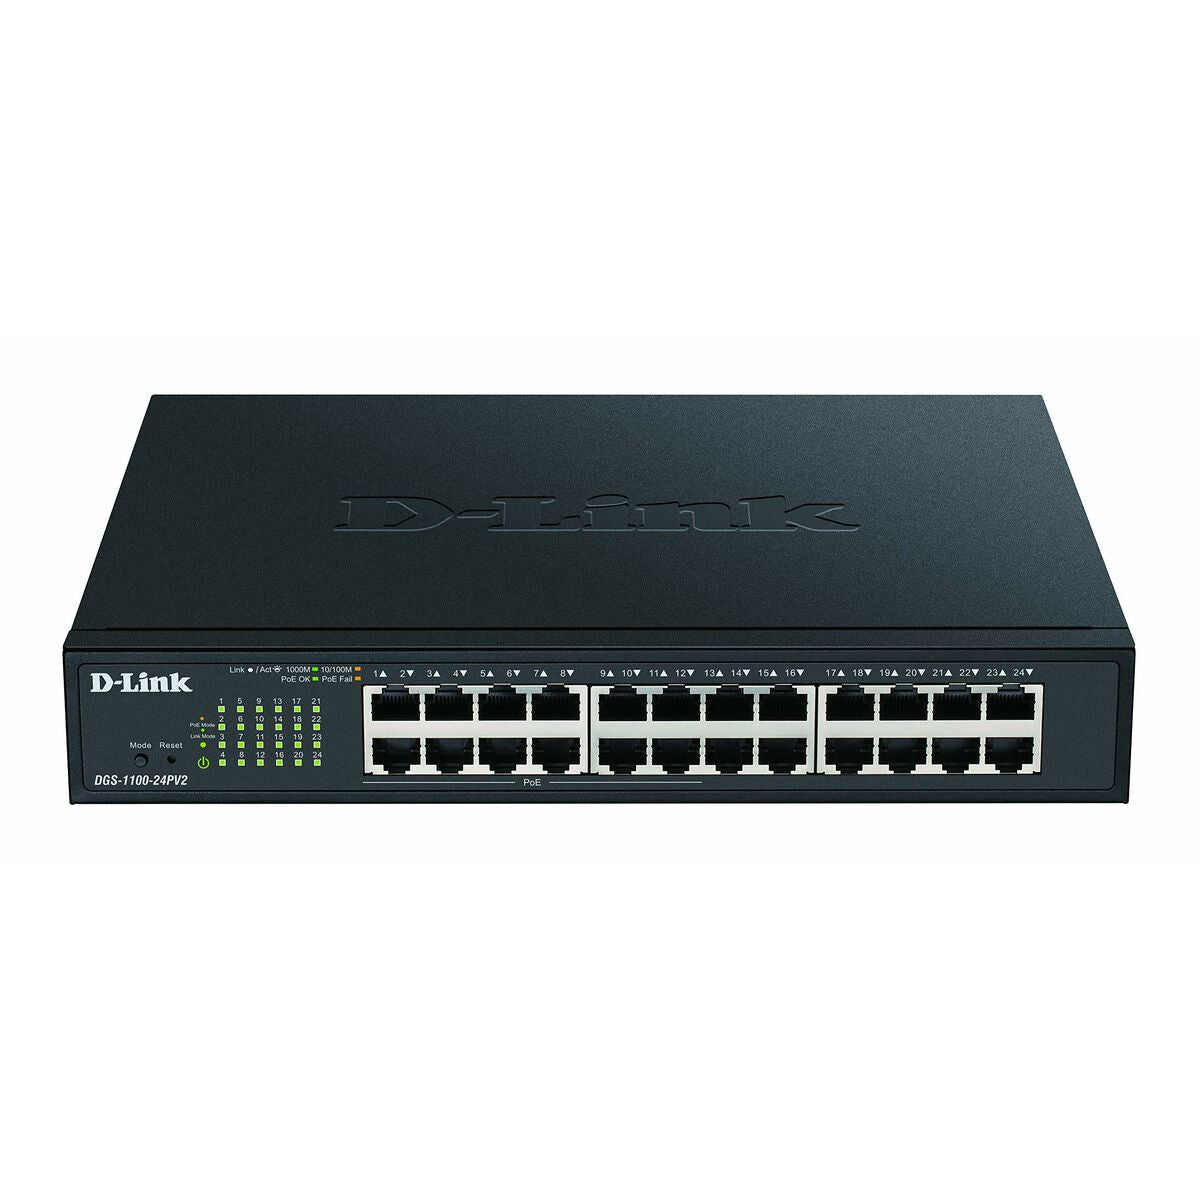 Switch D-Link DGS-1100-24PV2/E, D-Link, Computing, Network devices, switch-d-link-dgs-1100-24pv2-e, Brand_D-Link, category-reference-2609, category-reference-2803, category-reference-2827, Condition_NEW, networks/wiring, Price_200 - 300, Teleworking, RiotNook